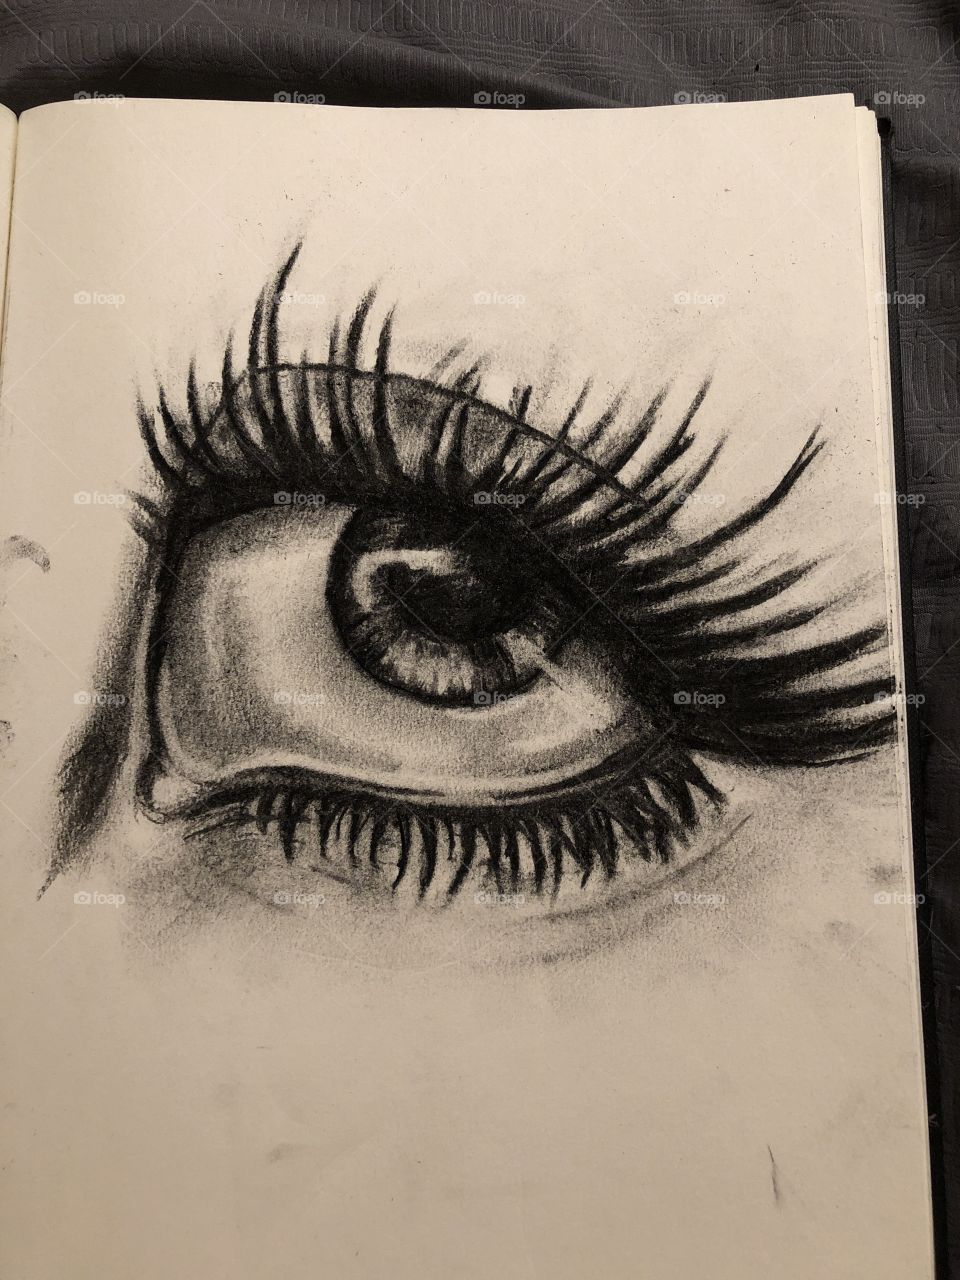 Charcoal sketch realism 